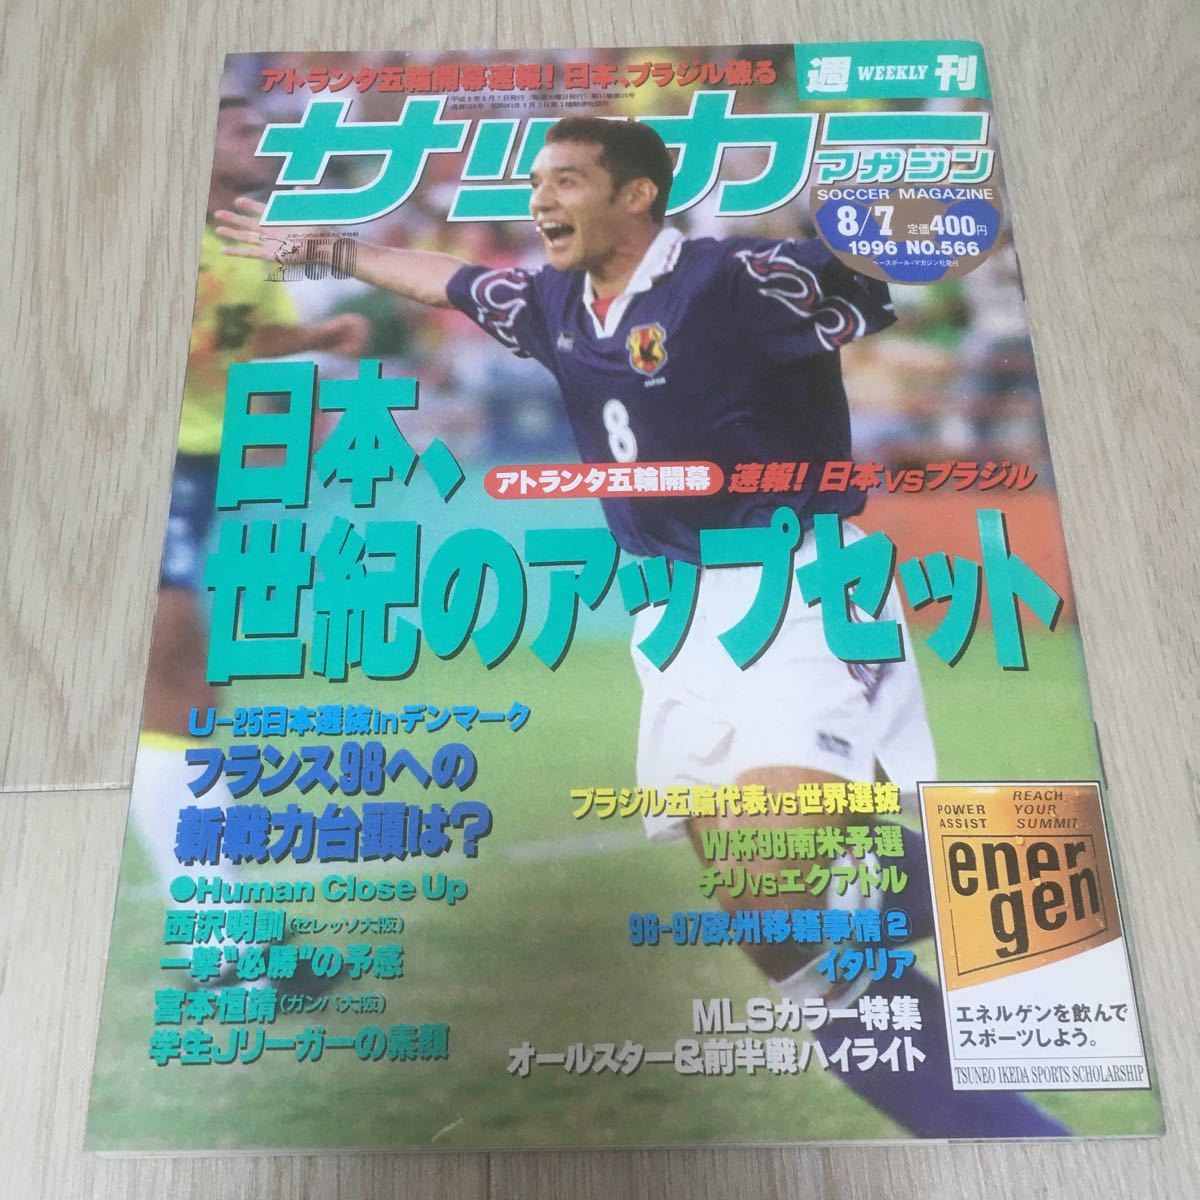 [ weekly soccer magazine ]1996 year 8 month 7 day (566)* Japan, century. up set Brazil representative a tiger nta. wheel . higashi shining . front . genuine . middle rice field britain .